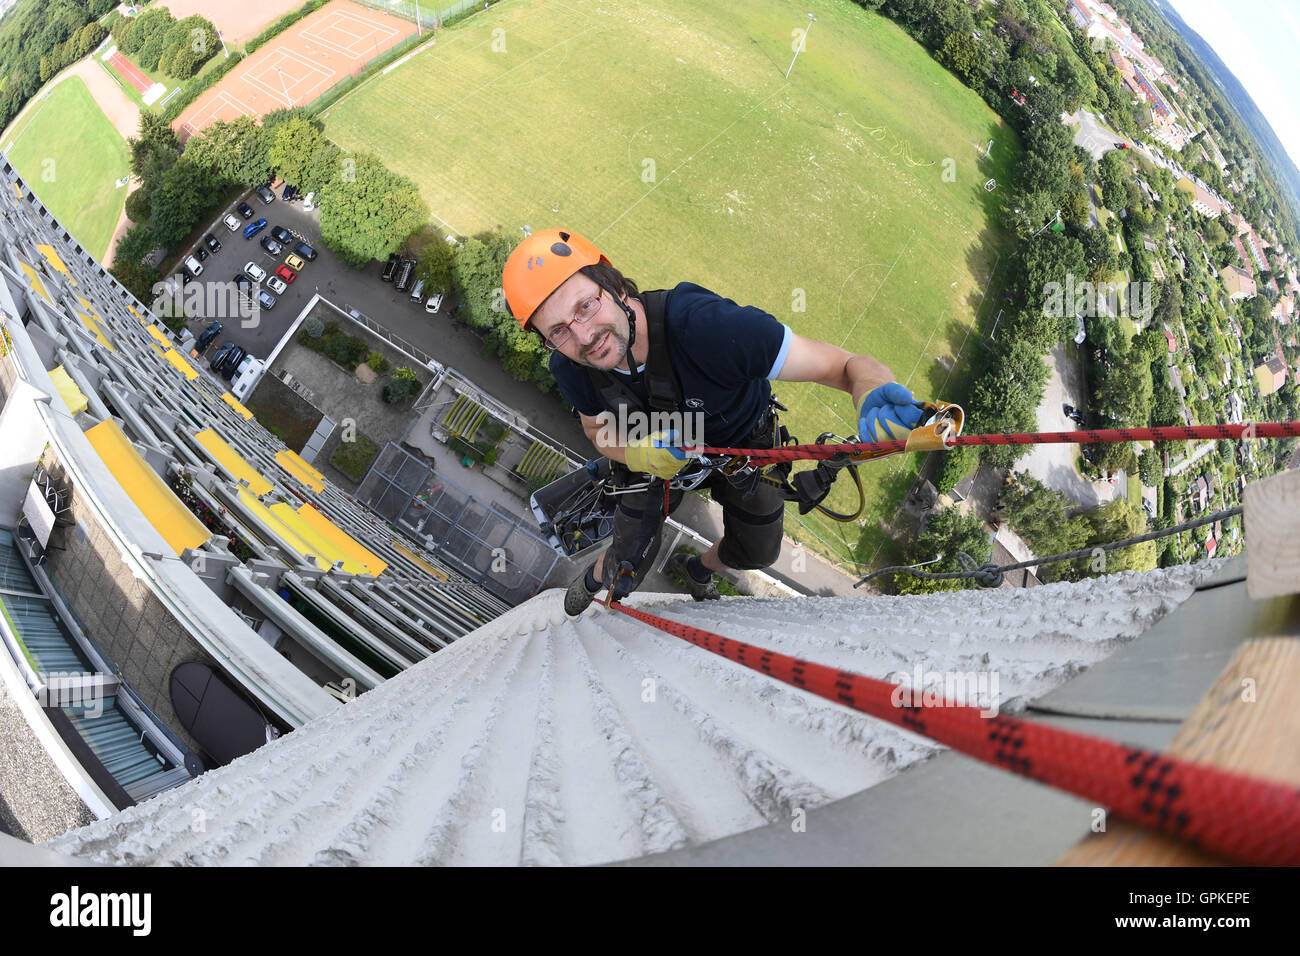 Karlsruhe, Germany. 11th Aug, 2016. Industrial climber Juergen Heinz-Pommer working on the facade of a skyscraper in Karlsruhe, Germany, 11 August 2016. PHOTO: ULI DECK/dpa/Alamy Live News Stock Photo